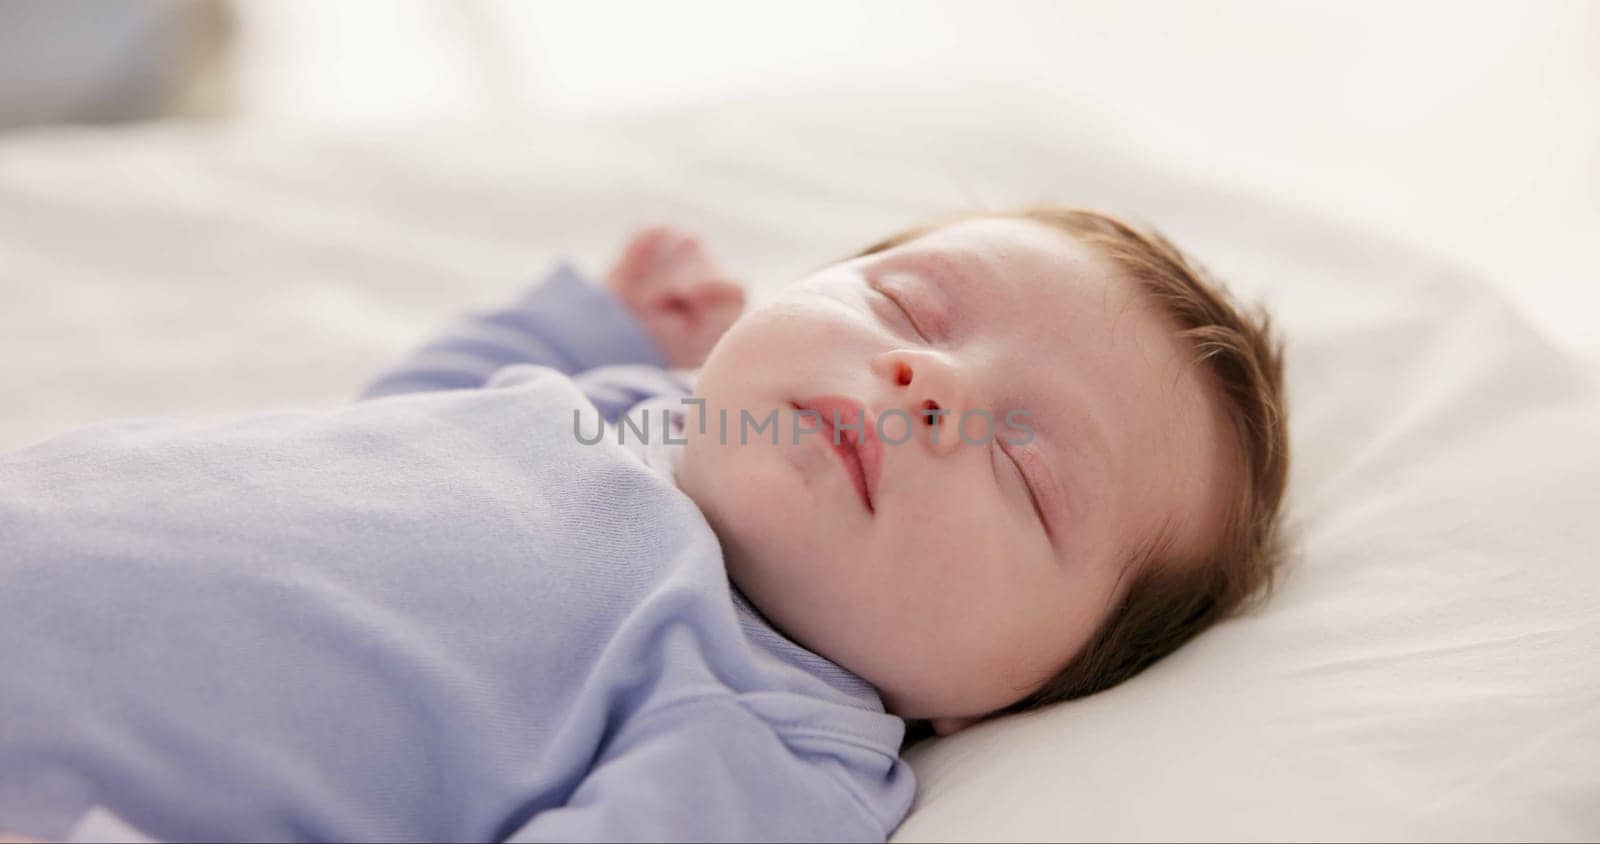 Relax, growth and sleep with a baby in a bedroom closeup in a home, dreaming during a nap for child development. Kids, calm and rest with an adorable newborn infant asleep on a bed for comfort.